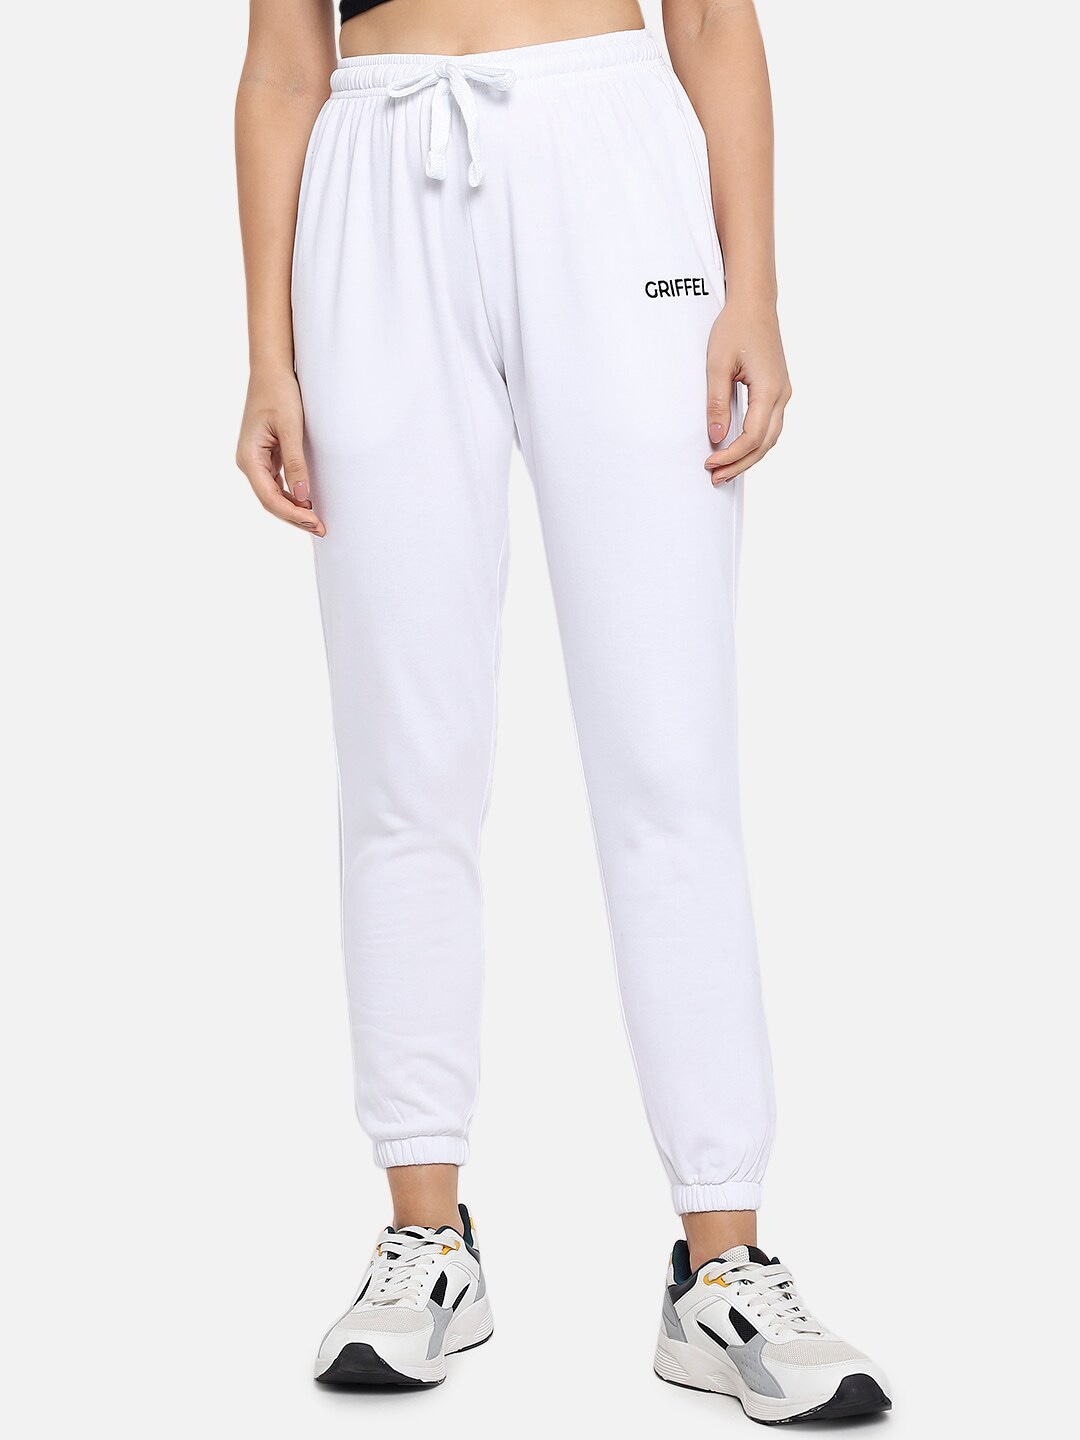 GRIFFEL Women White Solid Cotton Joggers Price in India